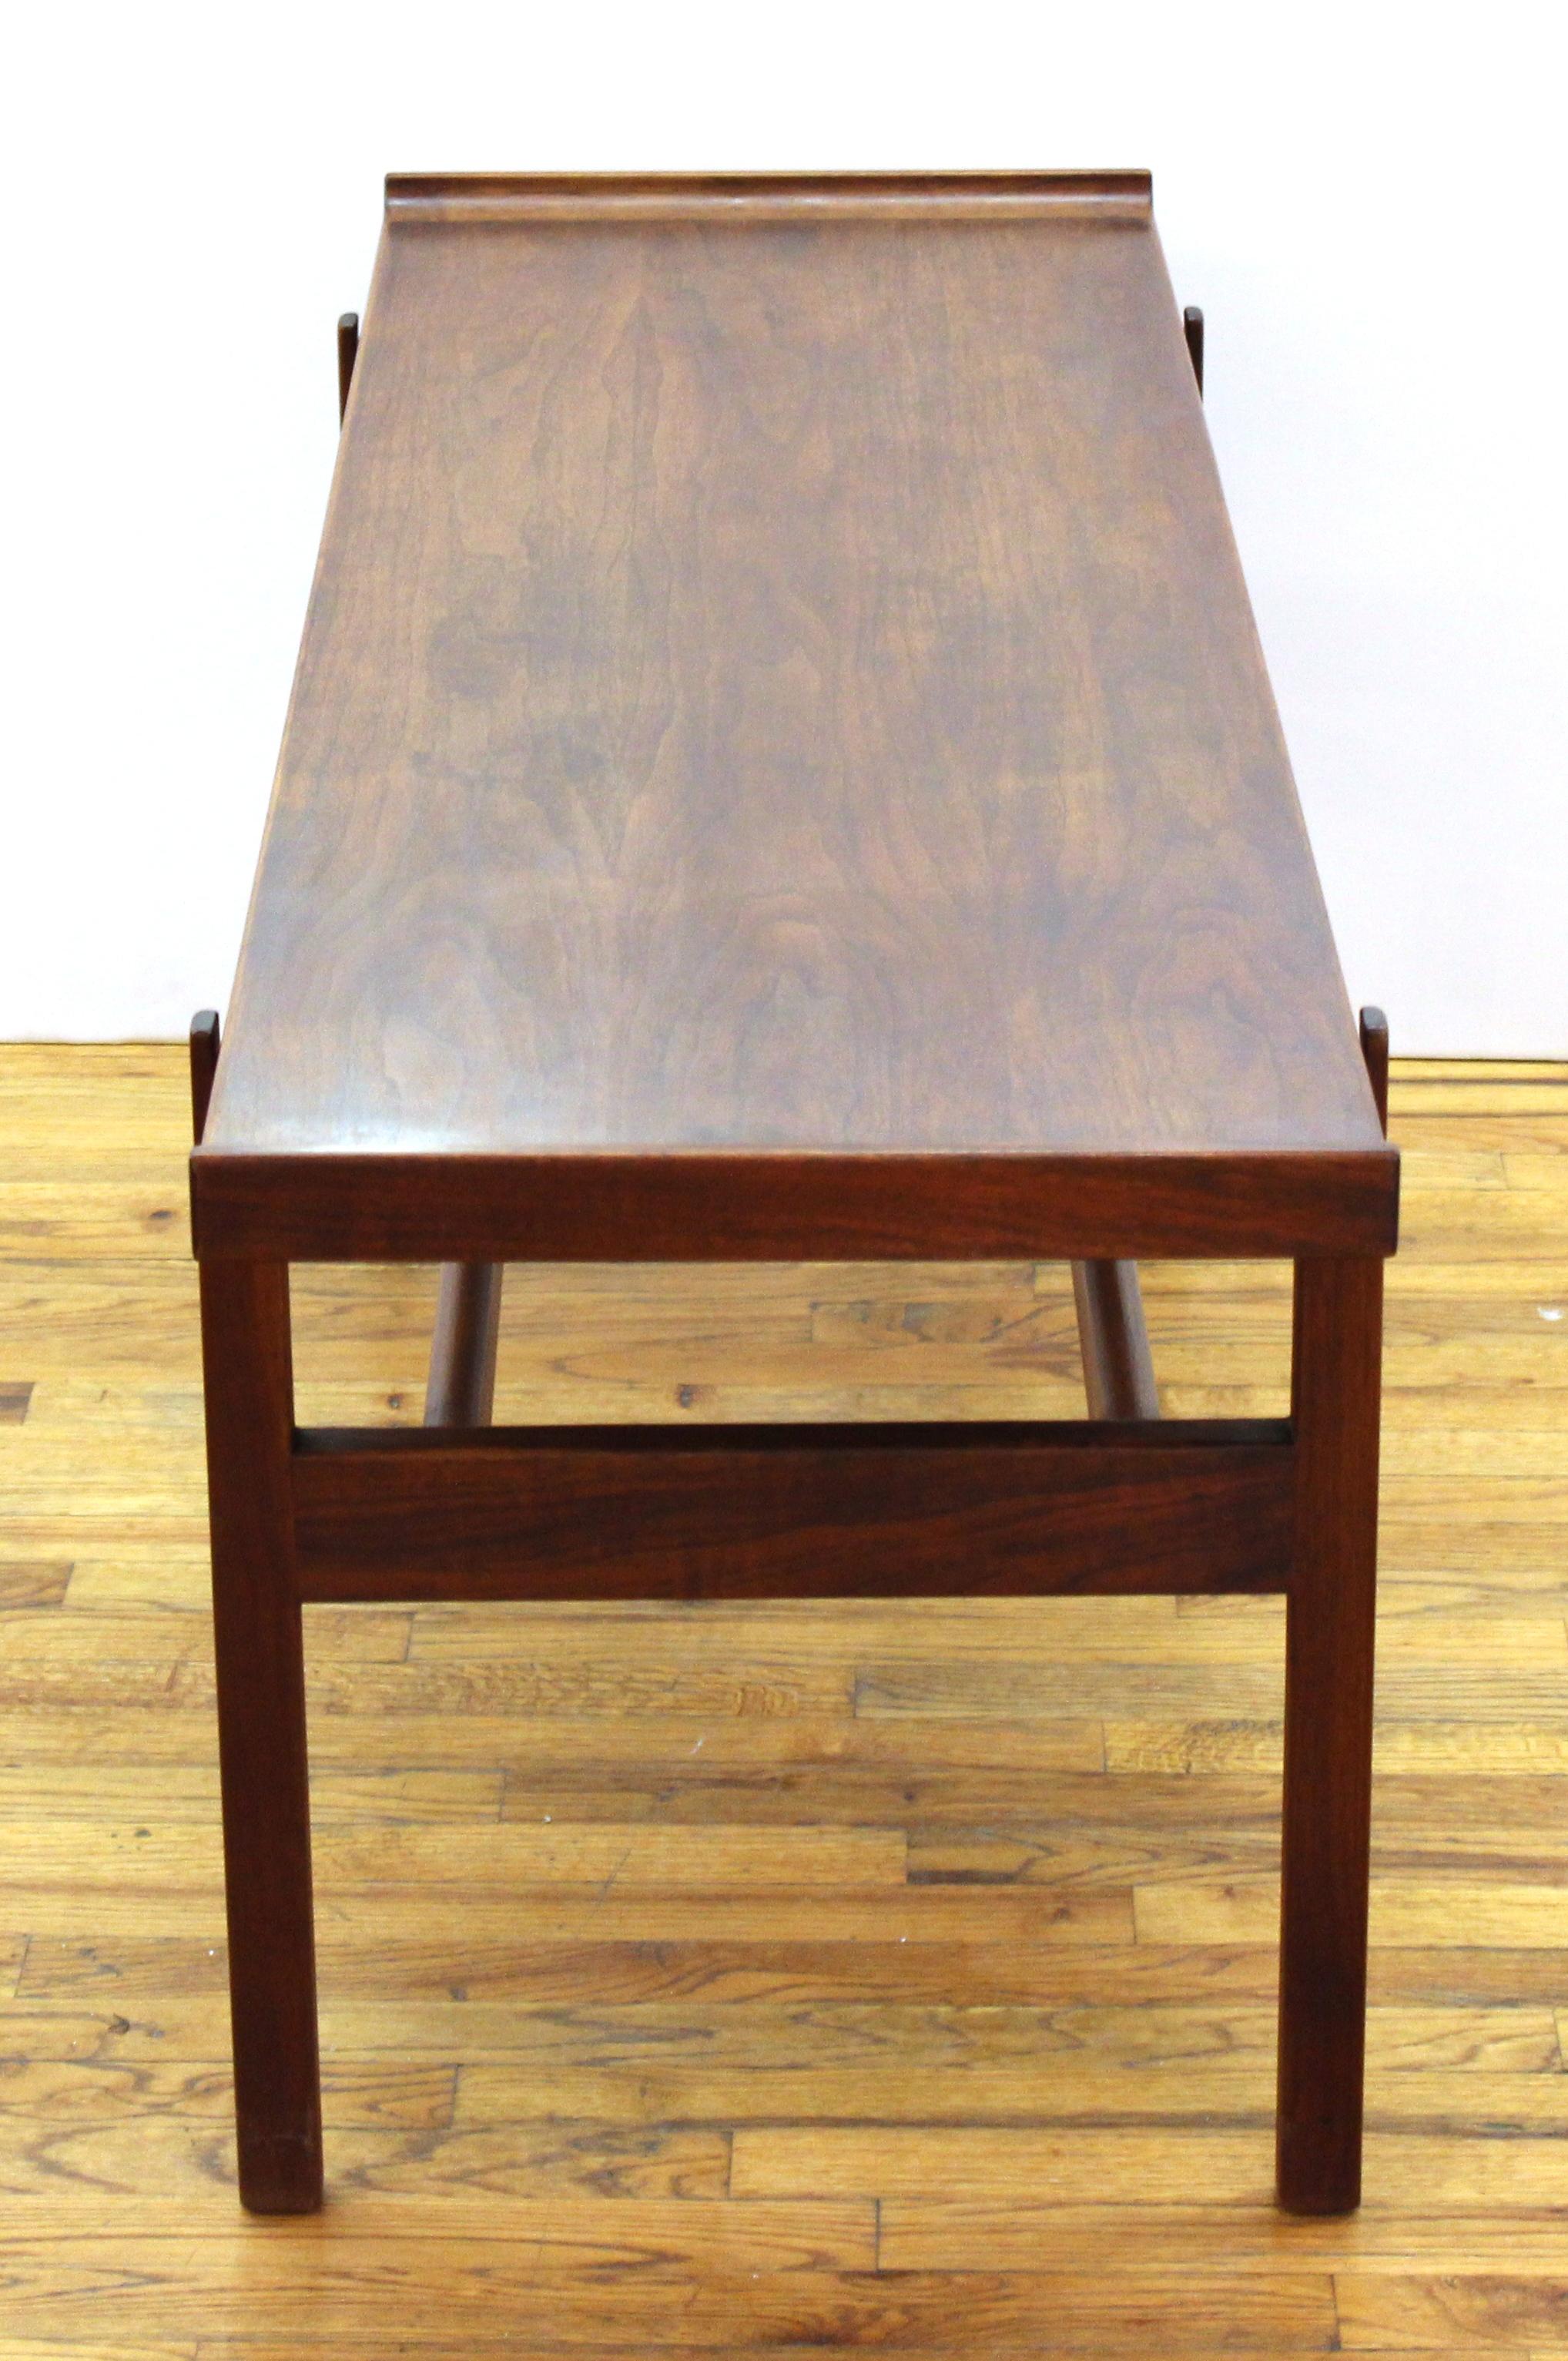 American Jens Risom Mid-Century Modern Coffee Table or Low Bench